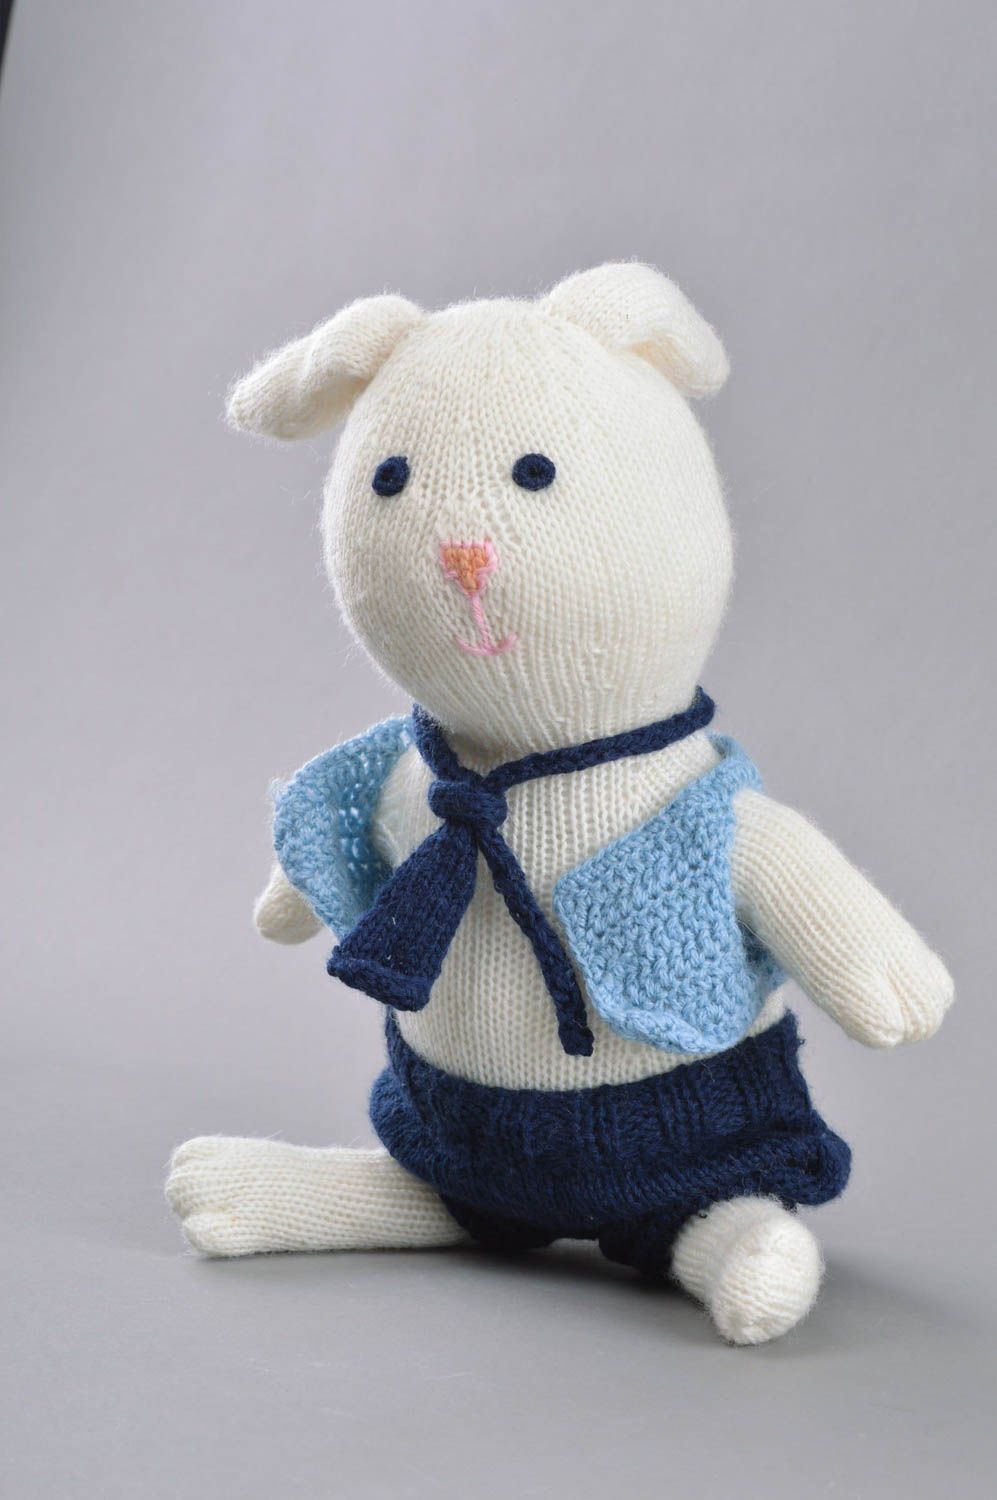 Handmade decorative crocheted toy white hare in shorts made of wool home decor photo 3